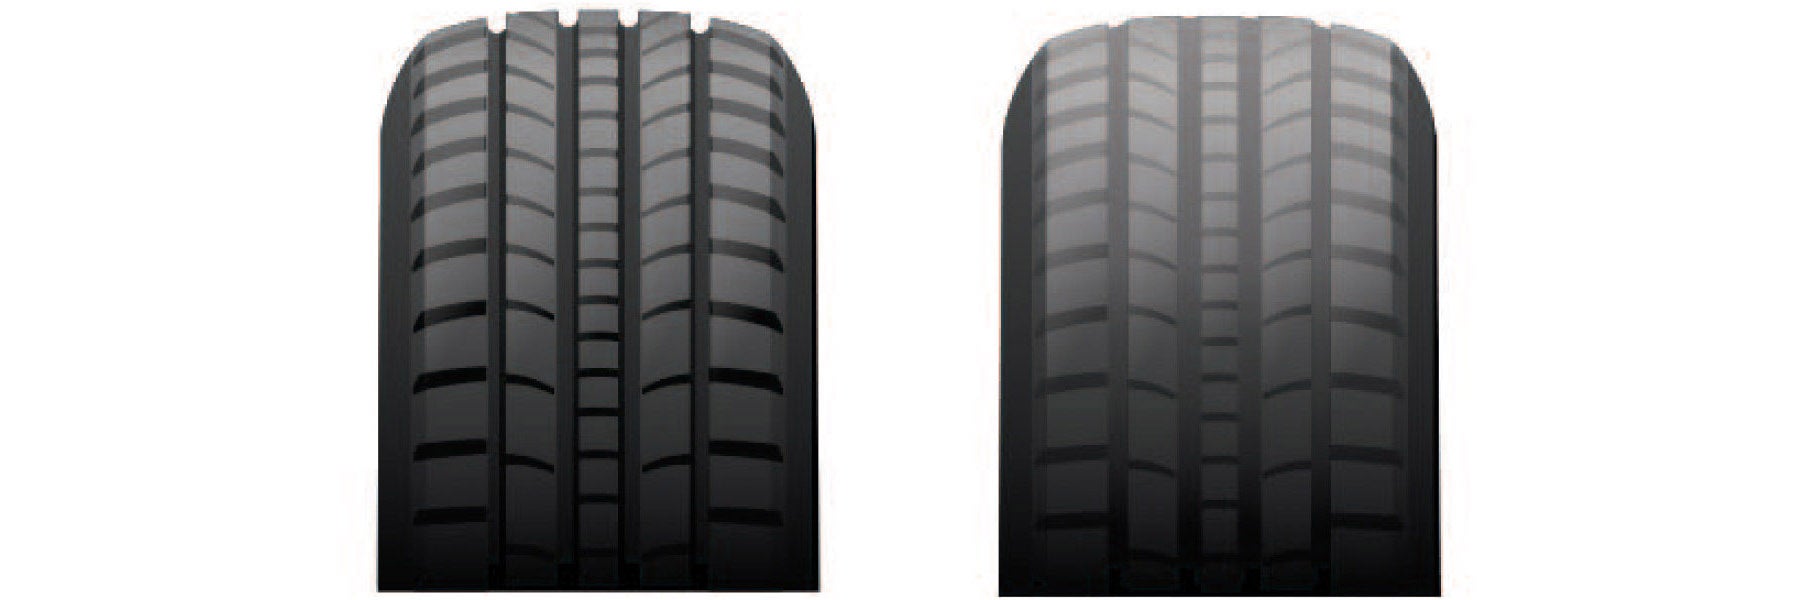 Tire tread depth comparison at Coughlin Kia of Lewis Center in Lewis Center OH